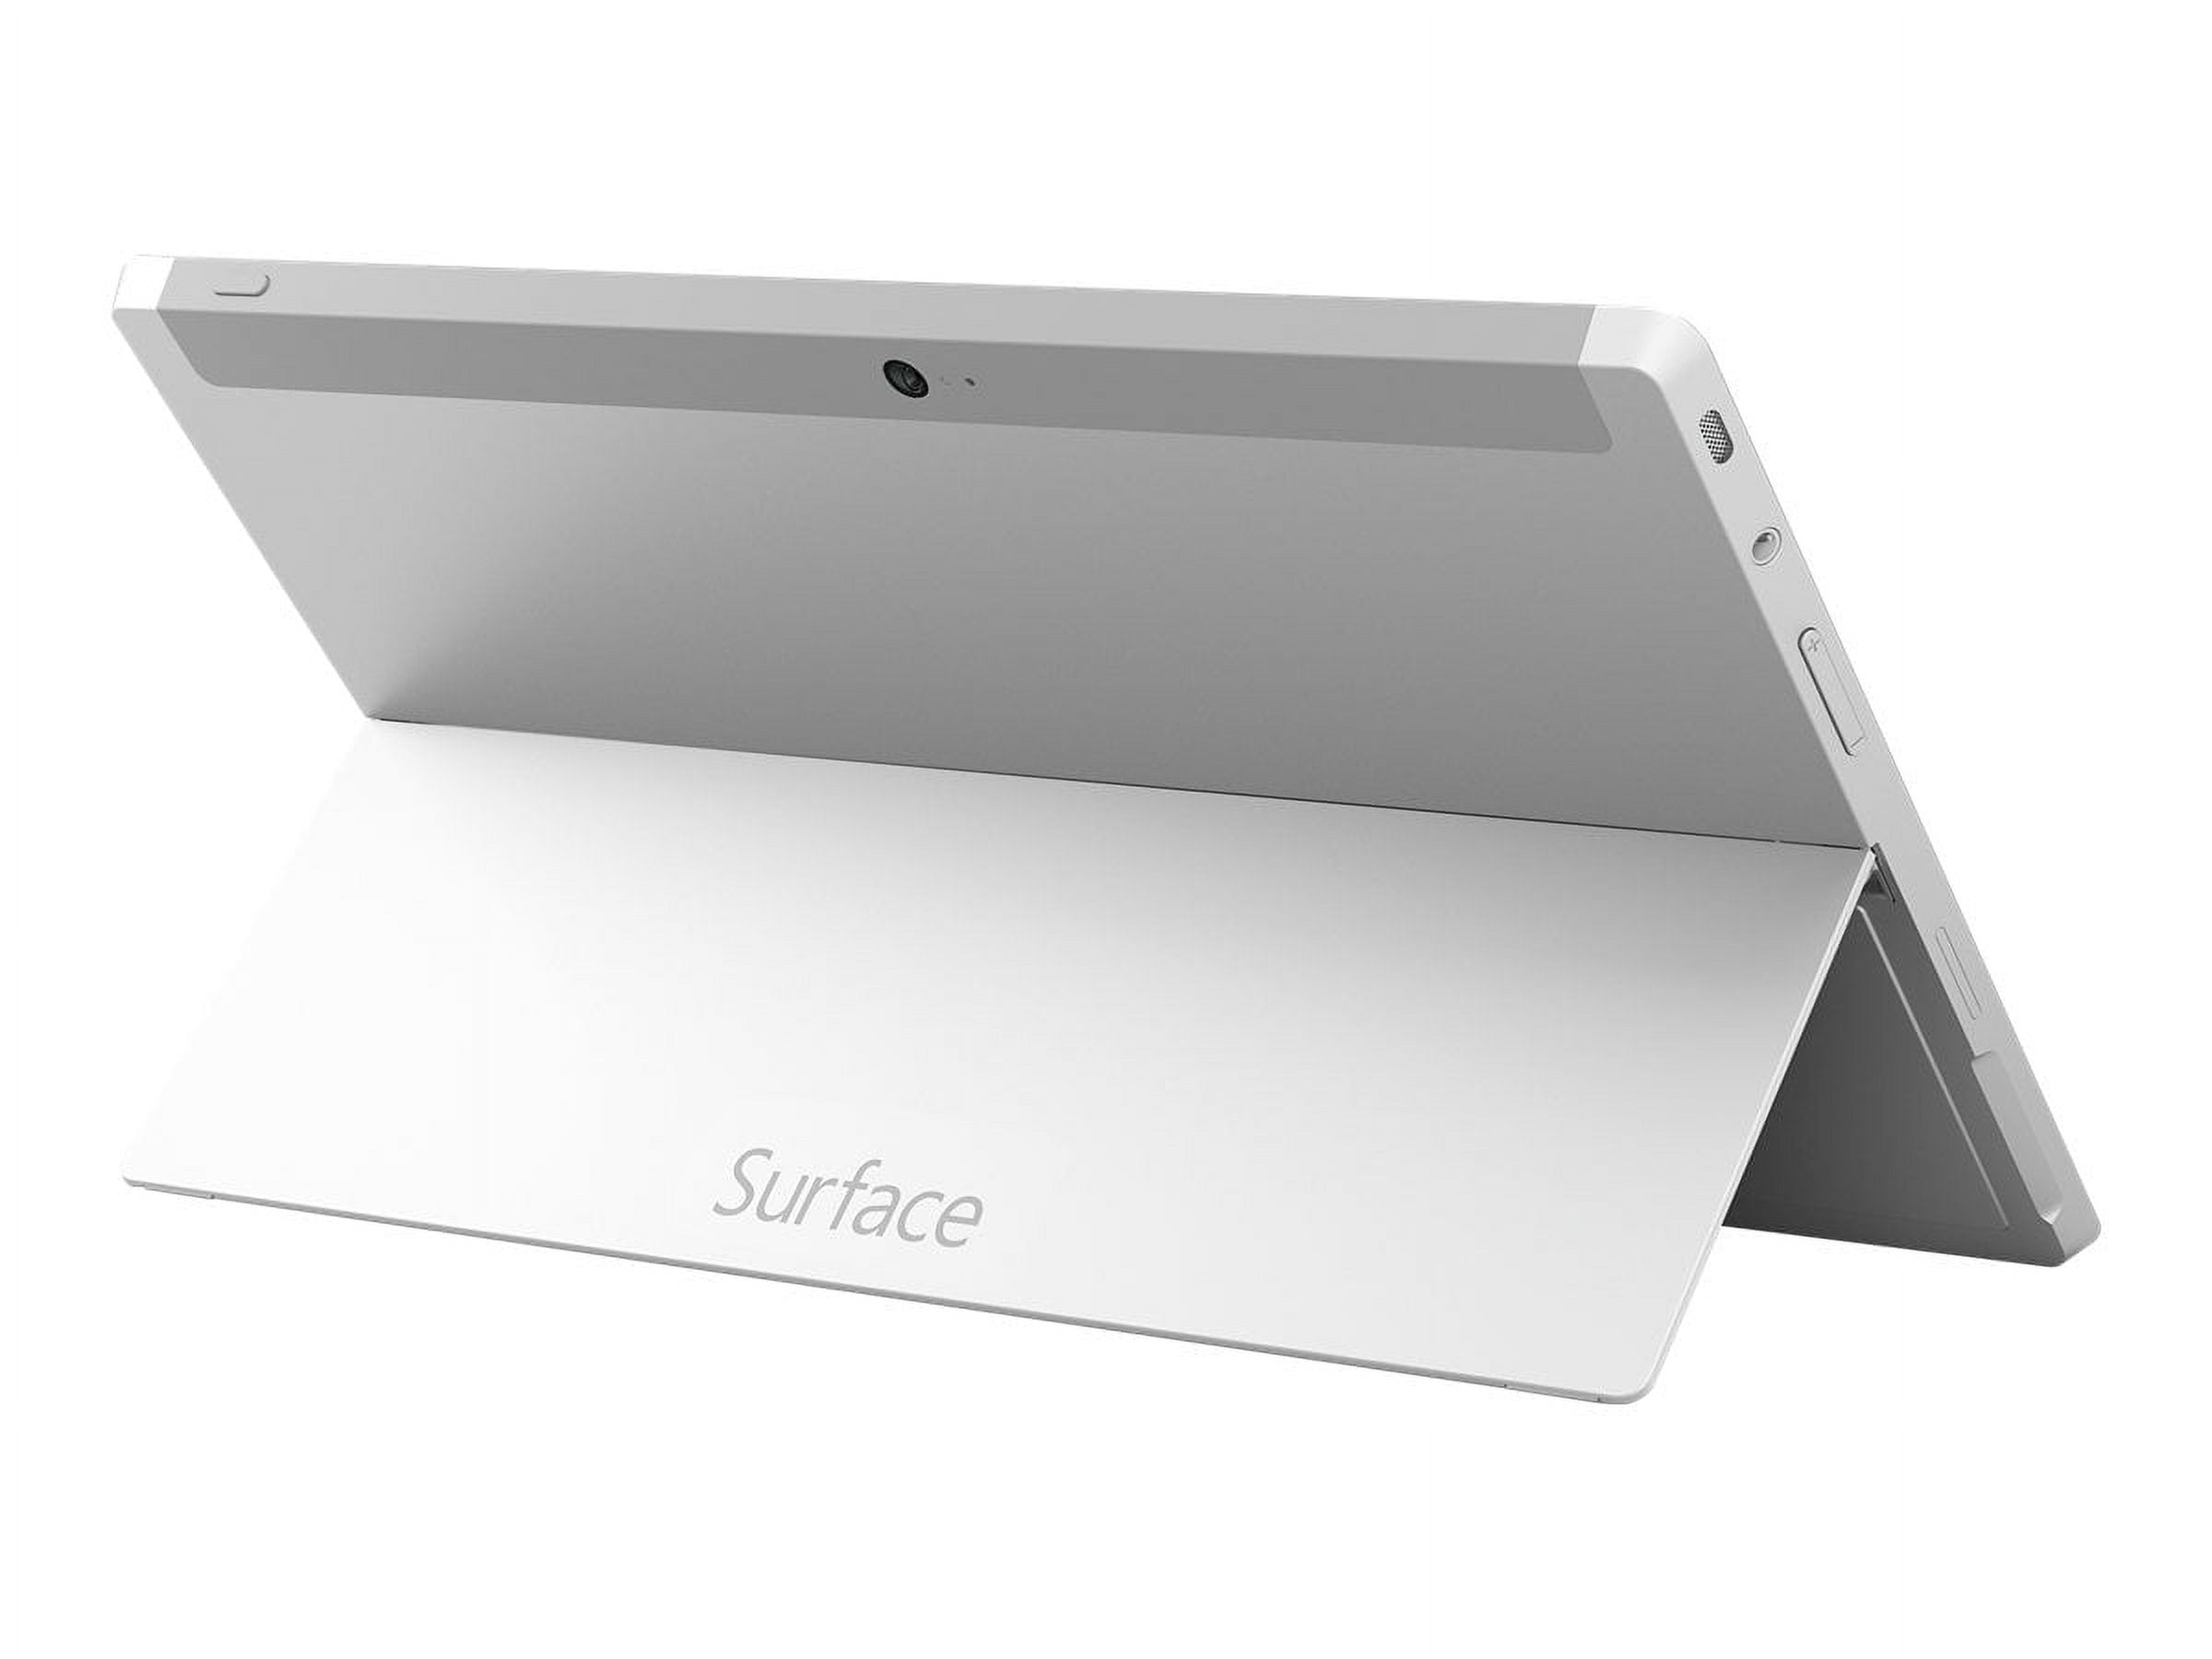 Microsoft Surface 2 - Tablet - Win 8.1 RT - 64 GB - 10.6